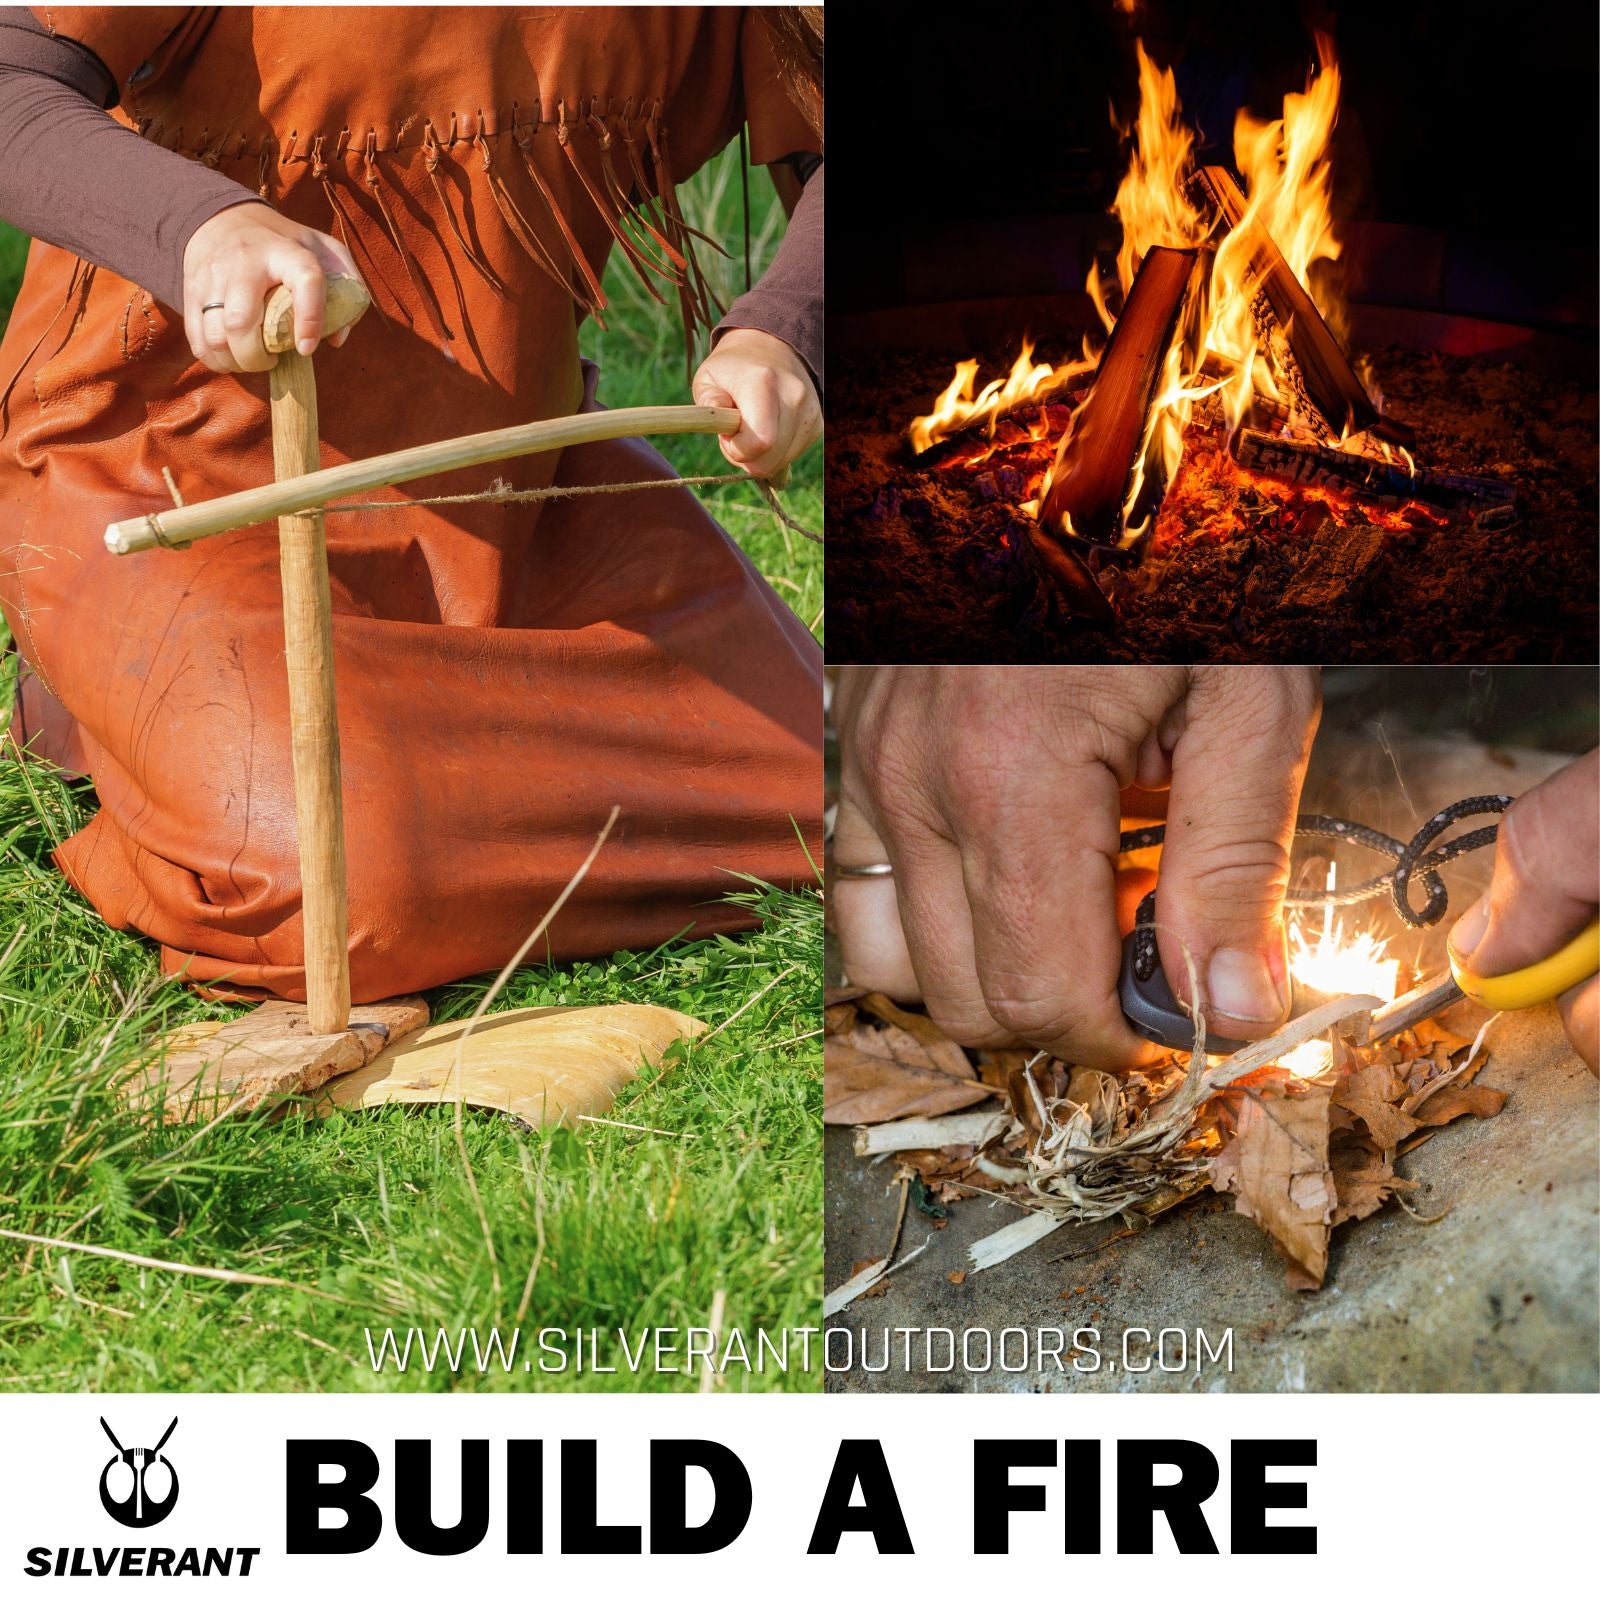 Build a Fire - SilverAnt Outdoors